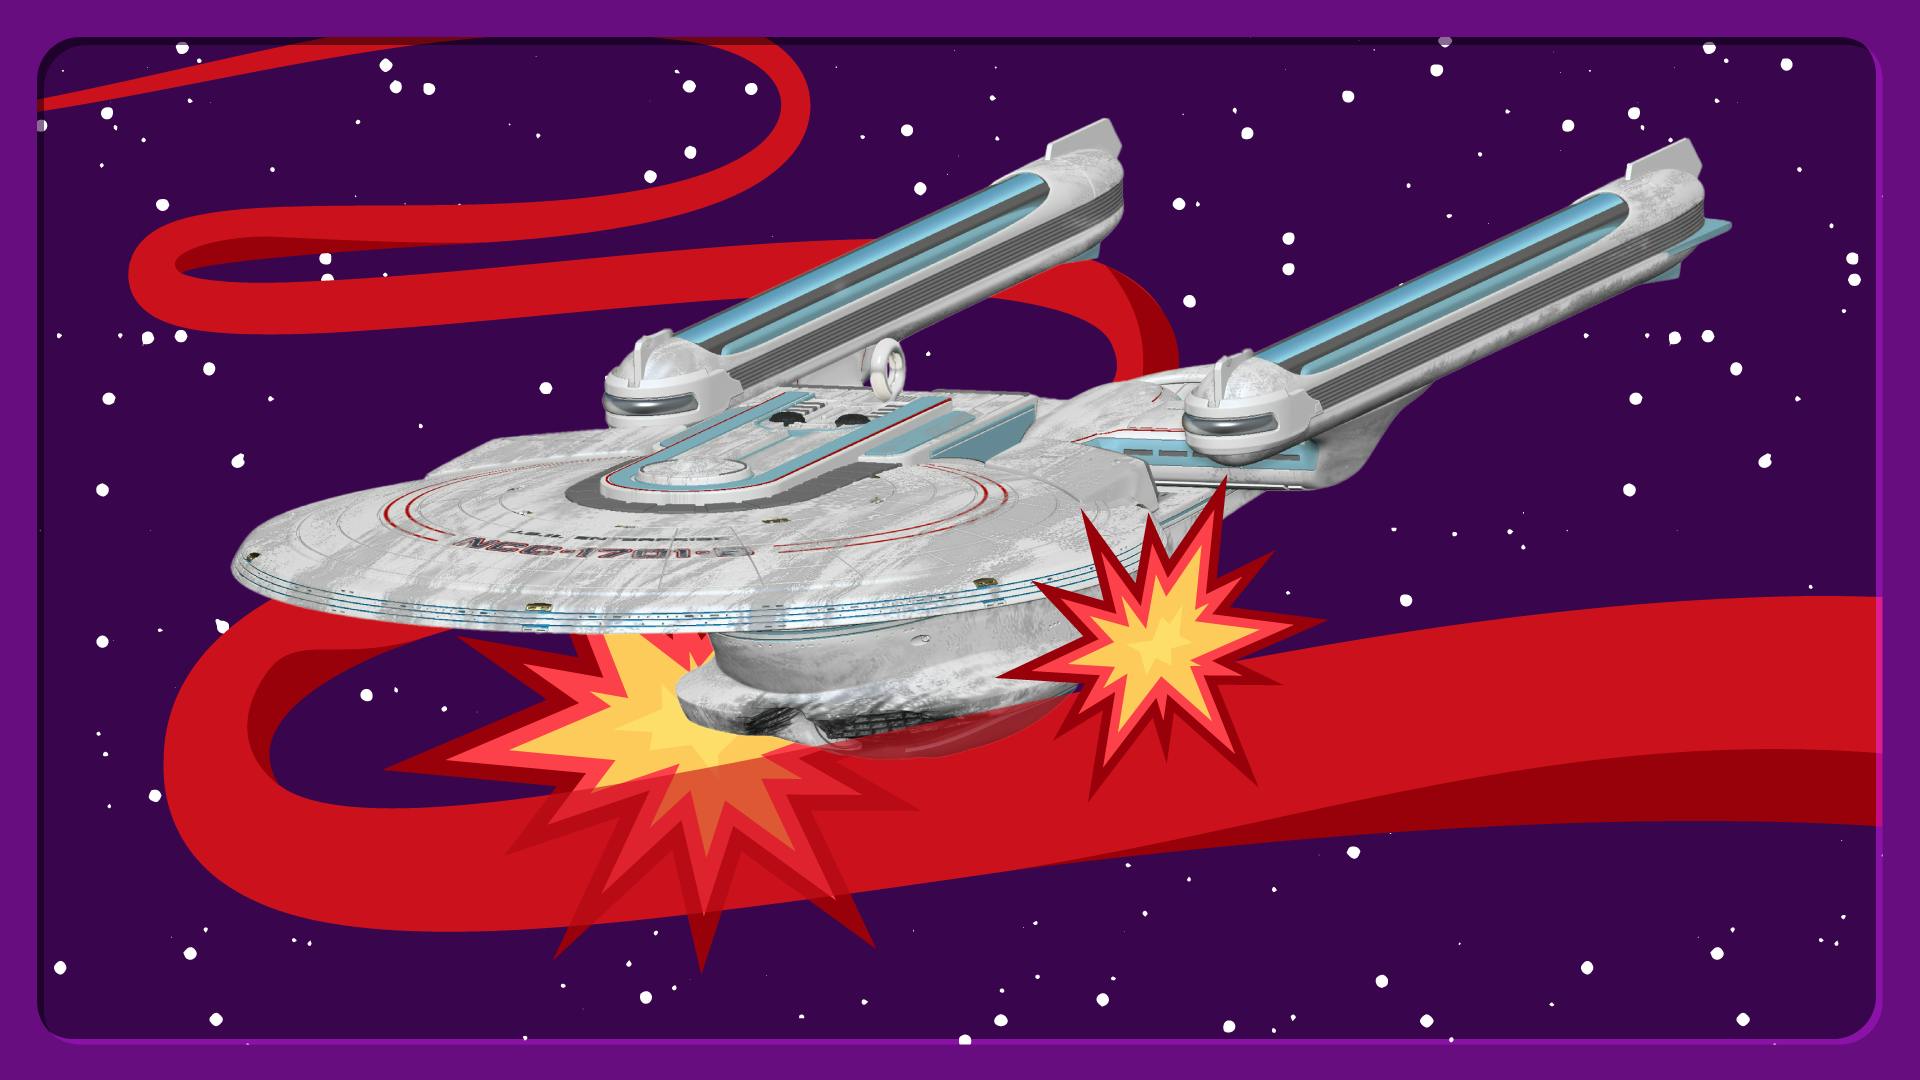 Graphic illustration featuring Hallmark's Enterprise-B with Nexus damage ornament with a ribbon trailing it